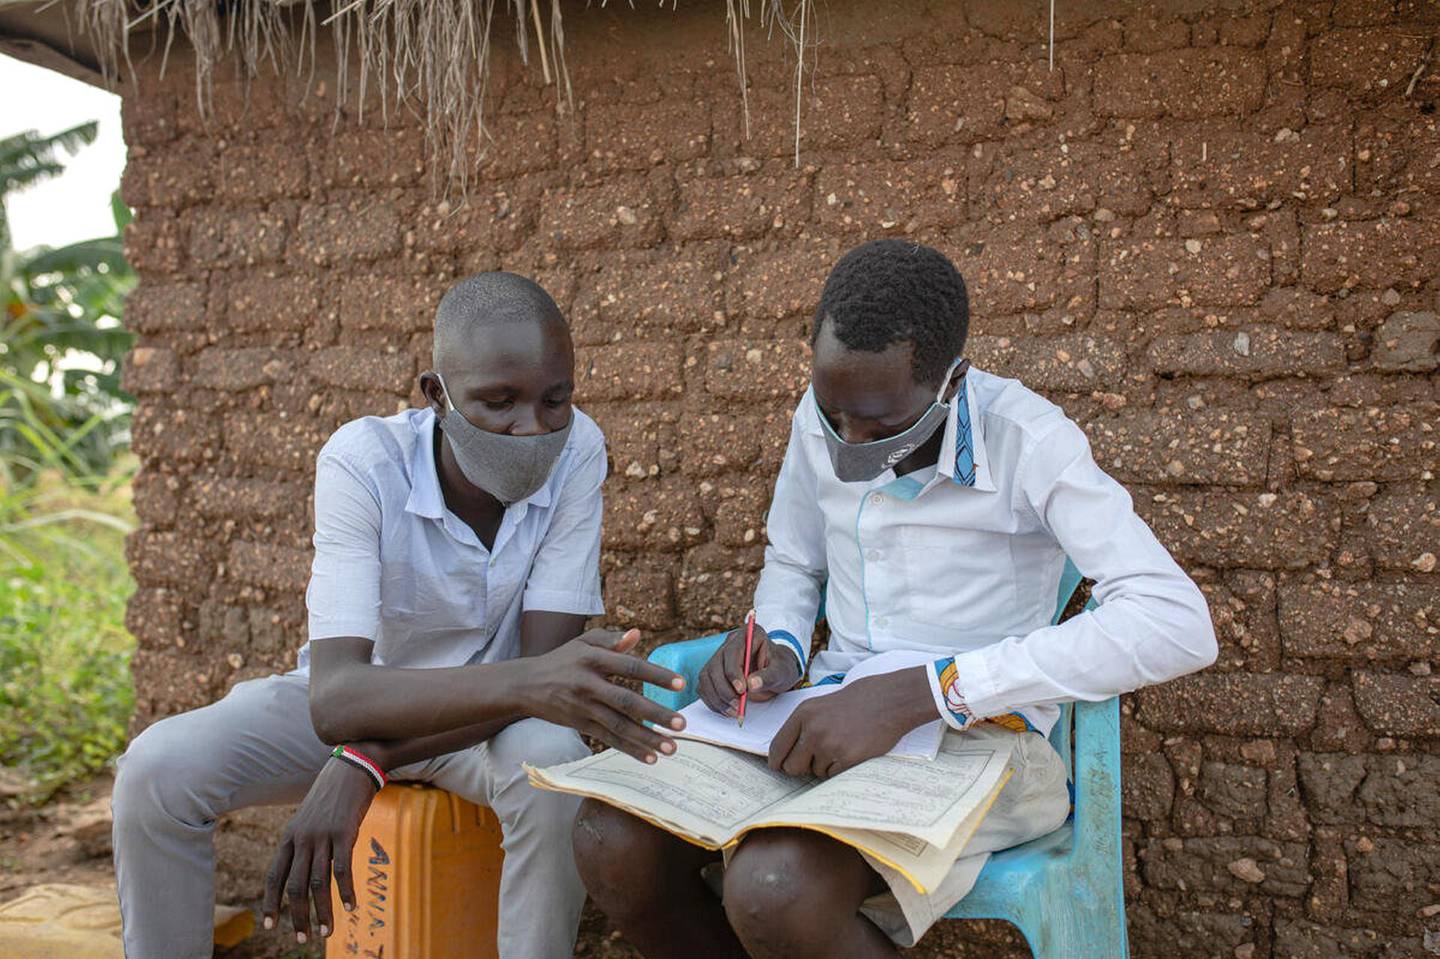 Jonathan*, 15 helping Peter, 15* to study. The boys are friends living in a refugee settlement for South Sudanese refugees in West Nile, Uganda. Jonathan inspired Peter, to go back to school after he had stopped attending school and had started working as a tailor. As friends, they spend time chatting, playing football, and studying.